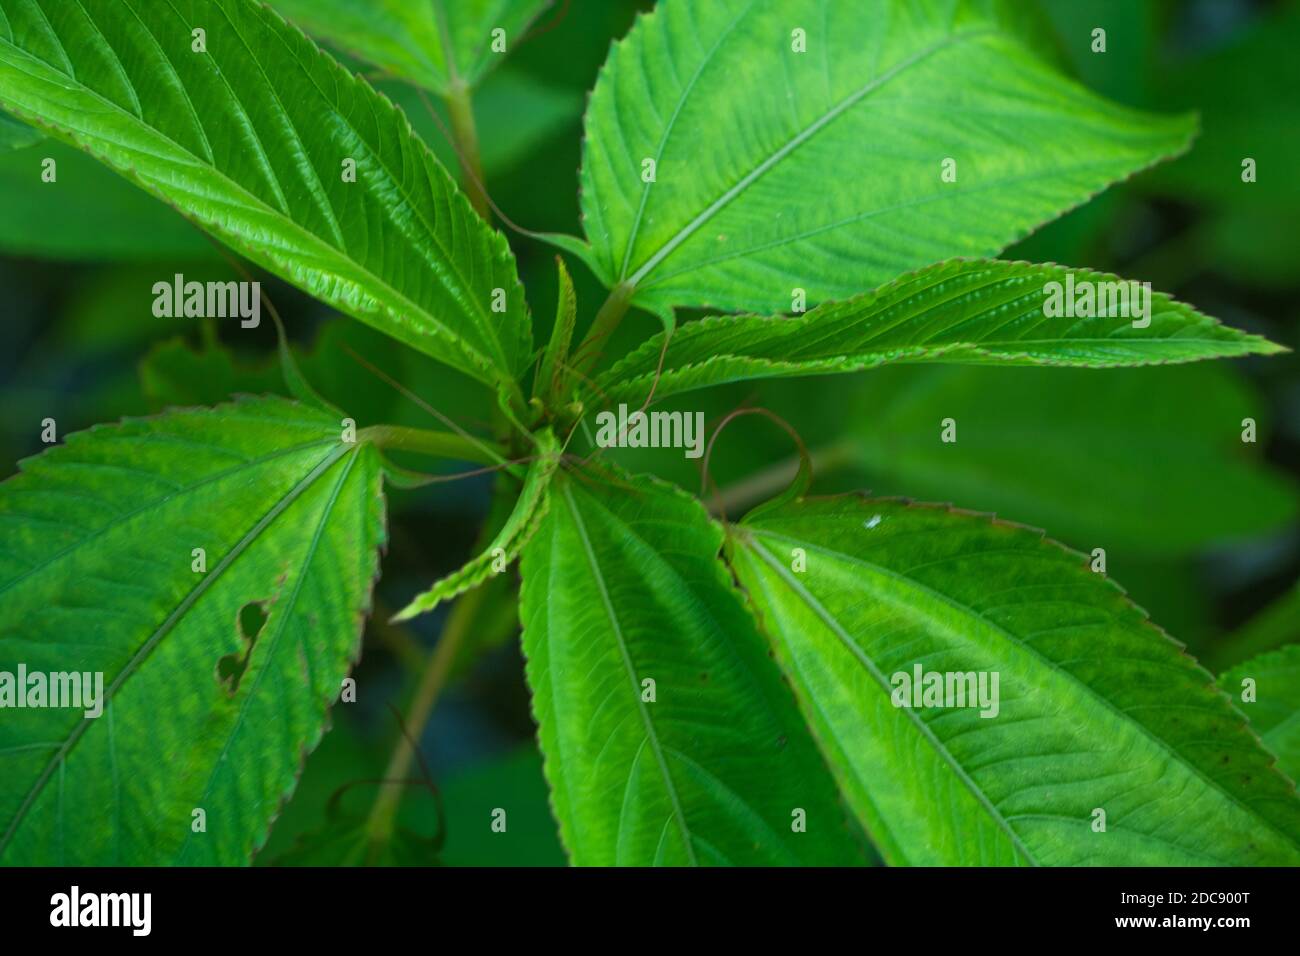 Jute leaves are also known as saluyot, ewedu or lalo, depending on the region they are being cultivated or cooked in. The leaves have slightly toothed Stock Photo